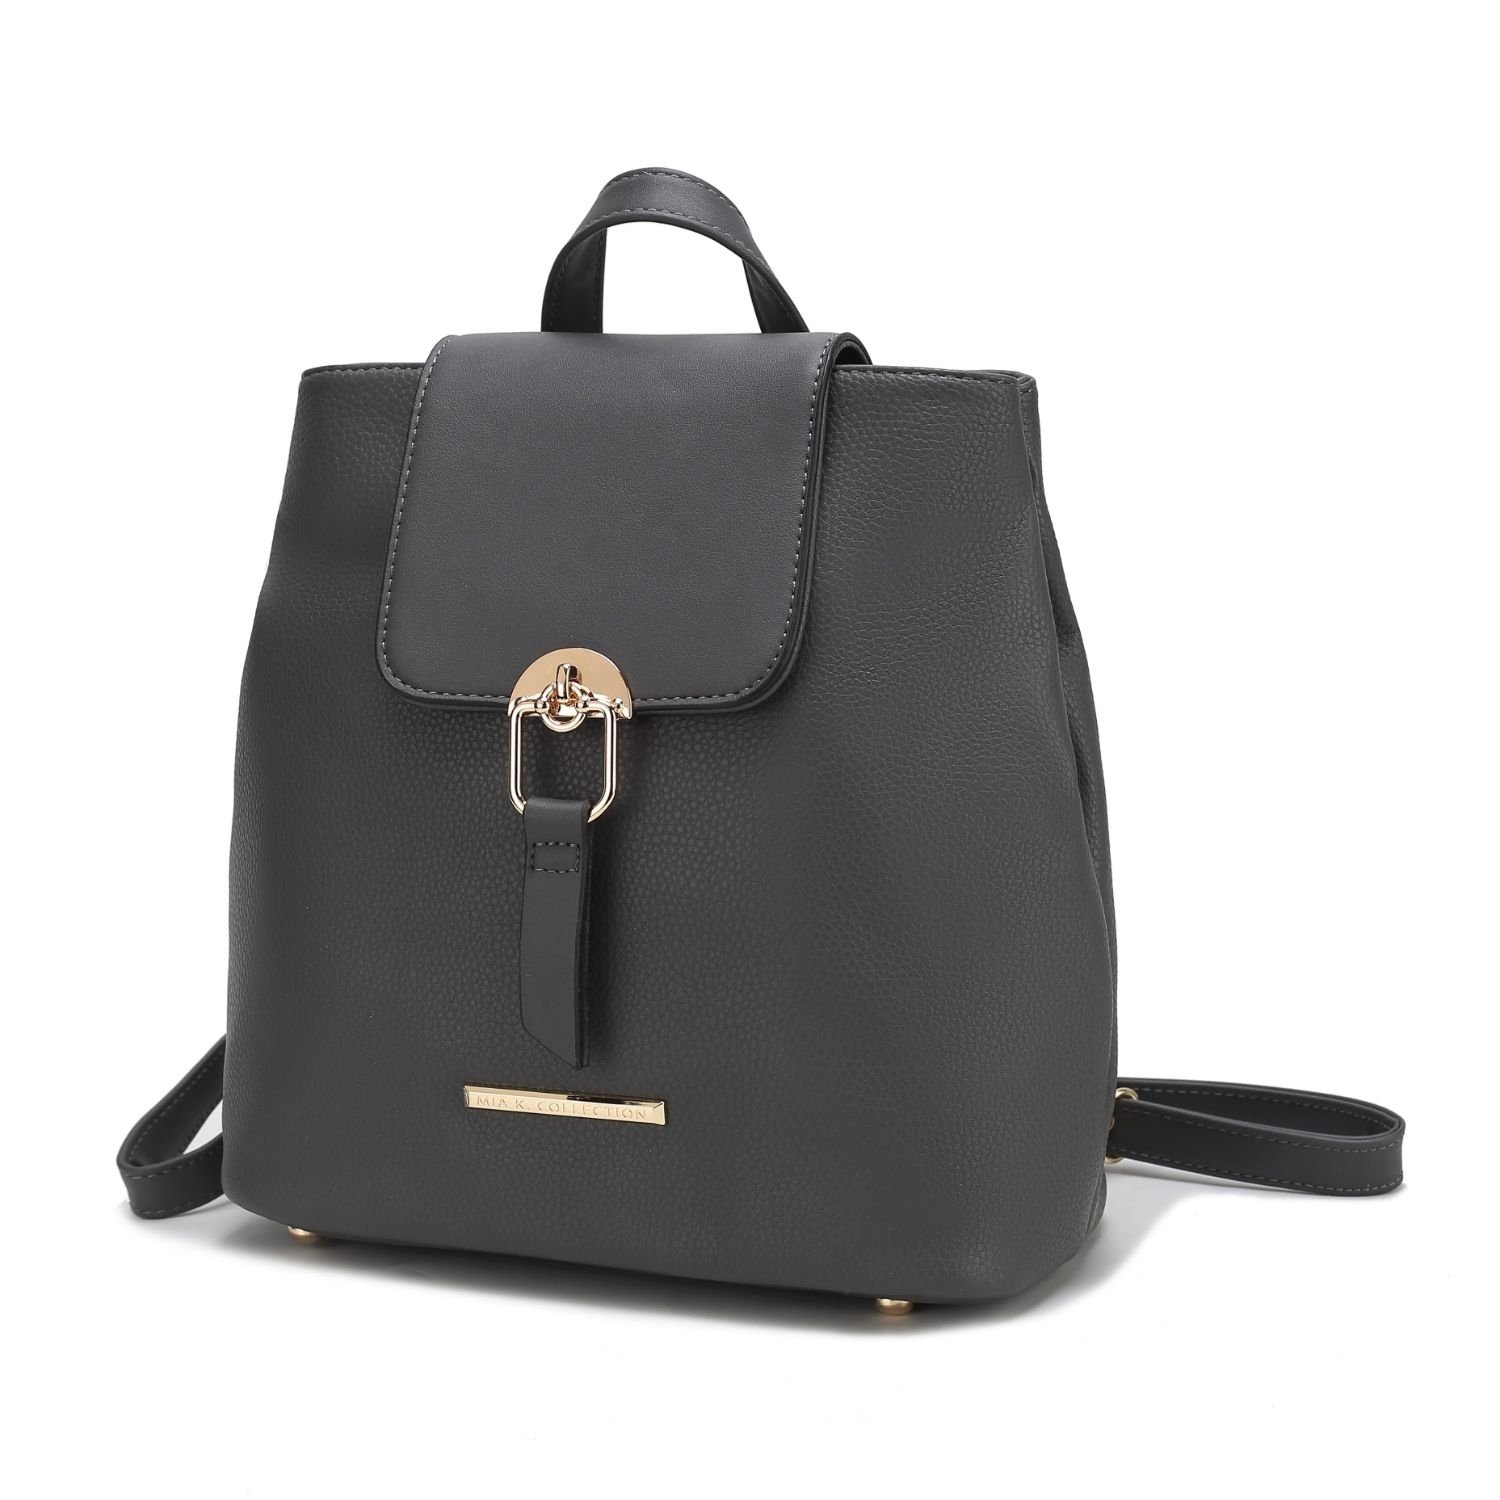 MKF Collection Ingrid Vegan Leather Women's Convertible Backpack By Mia K - Charcoal